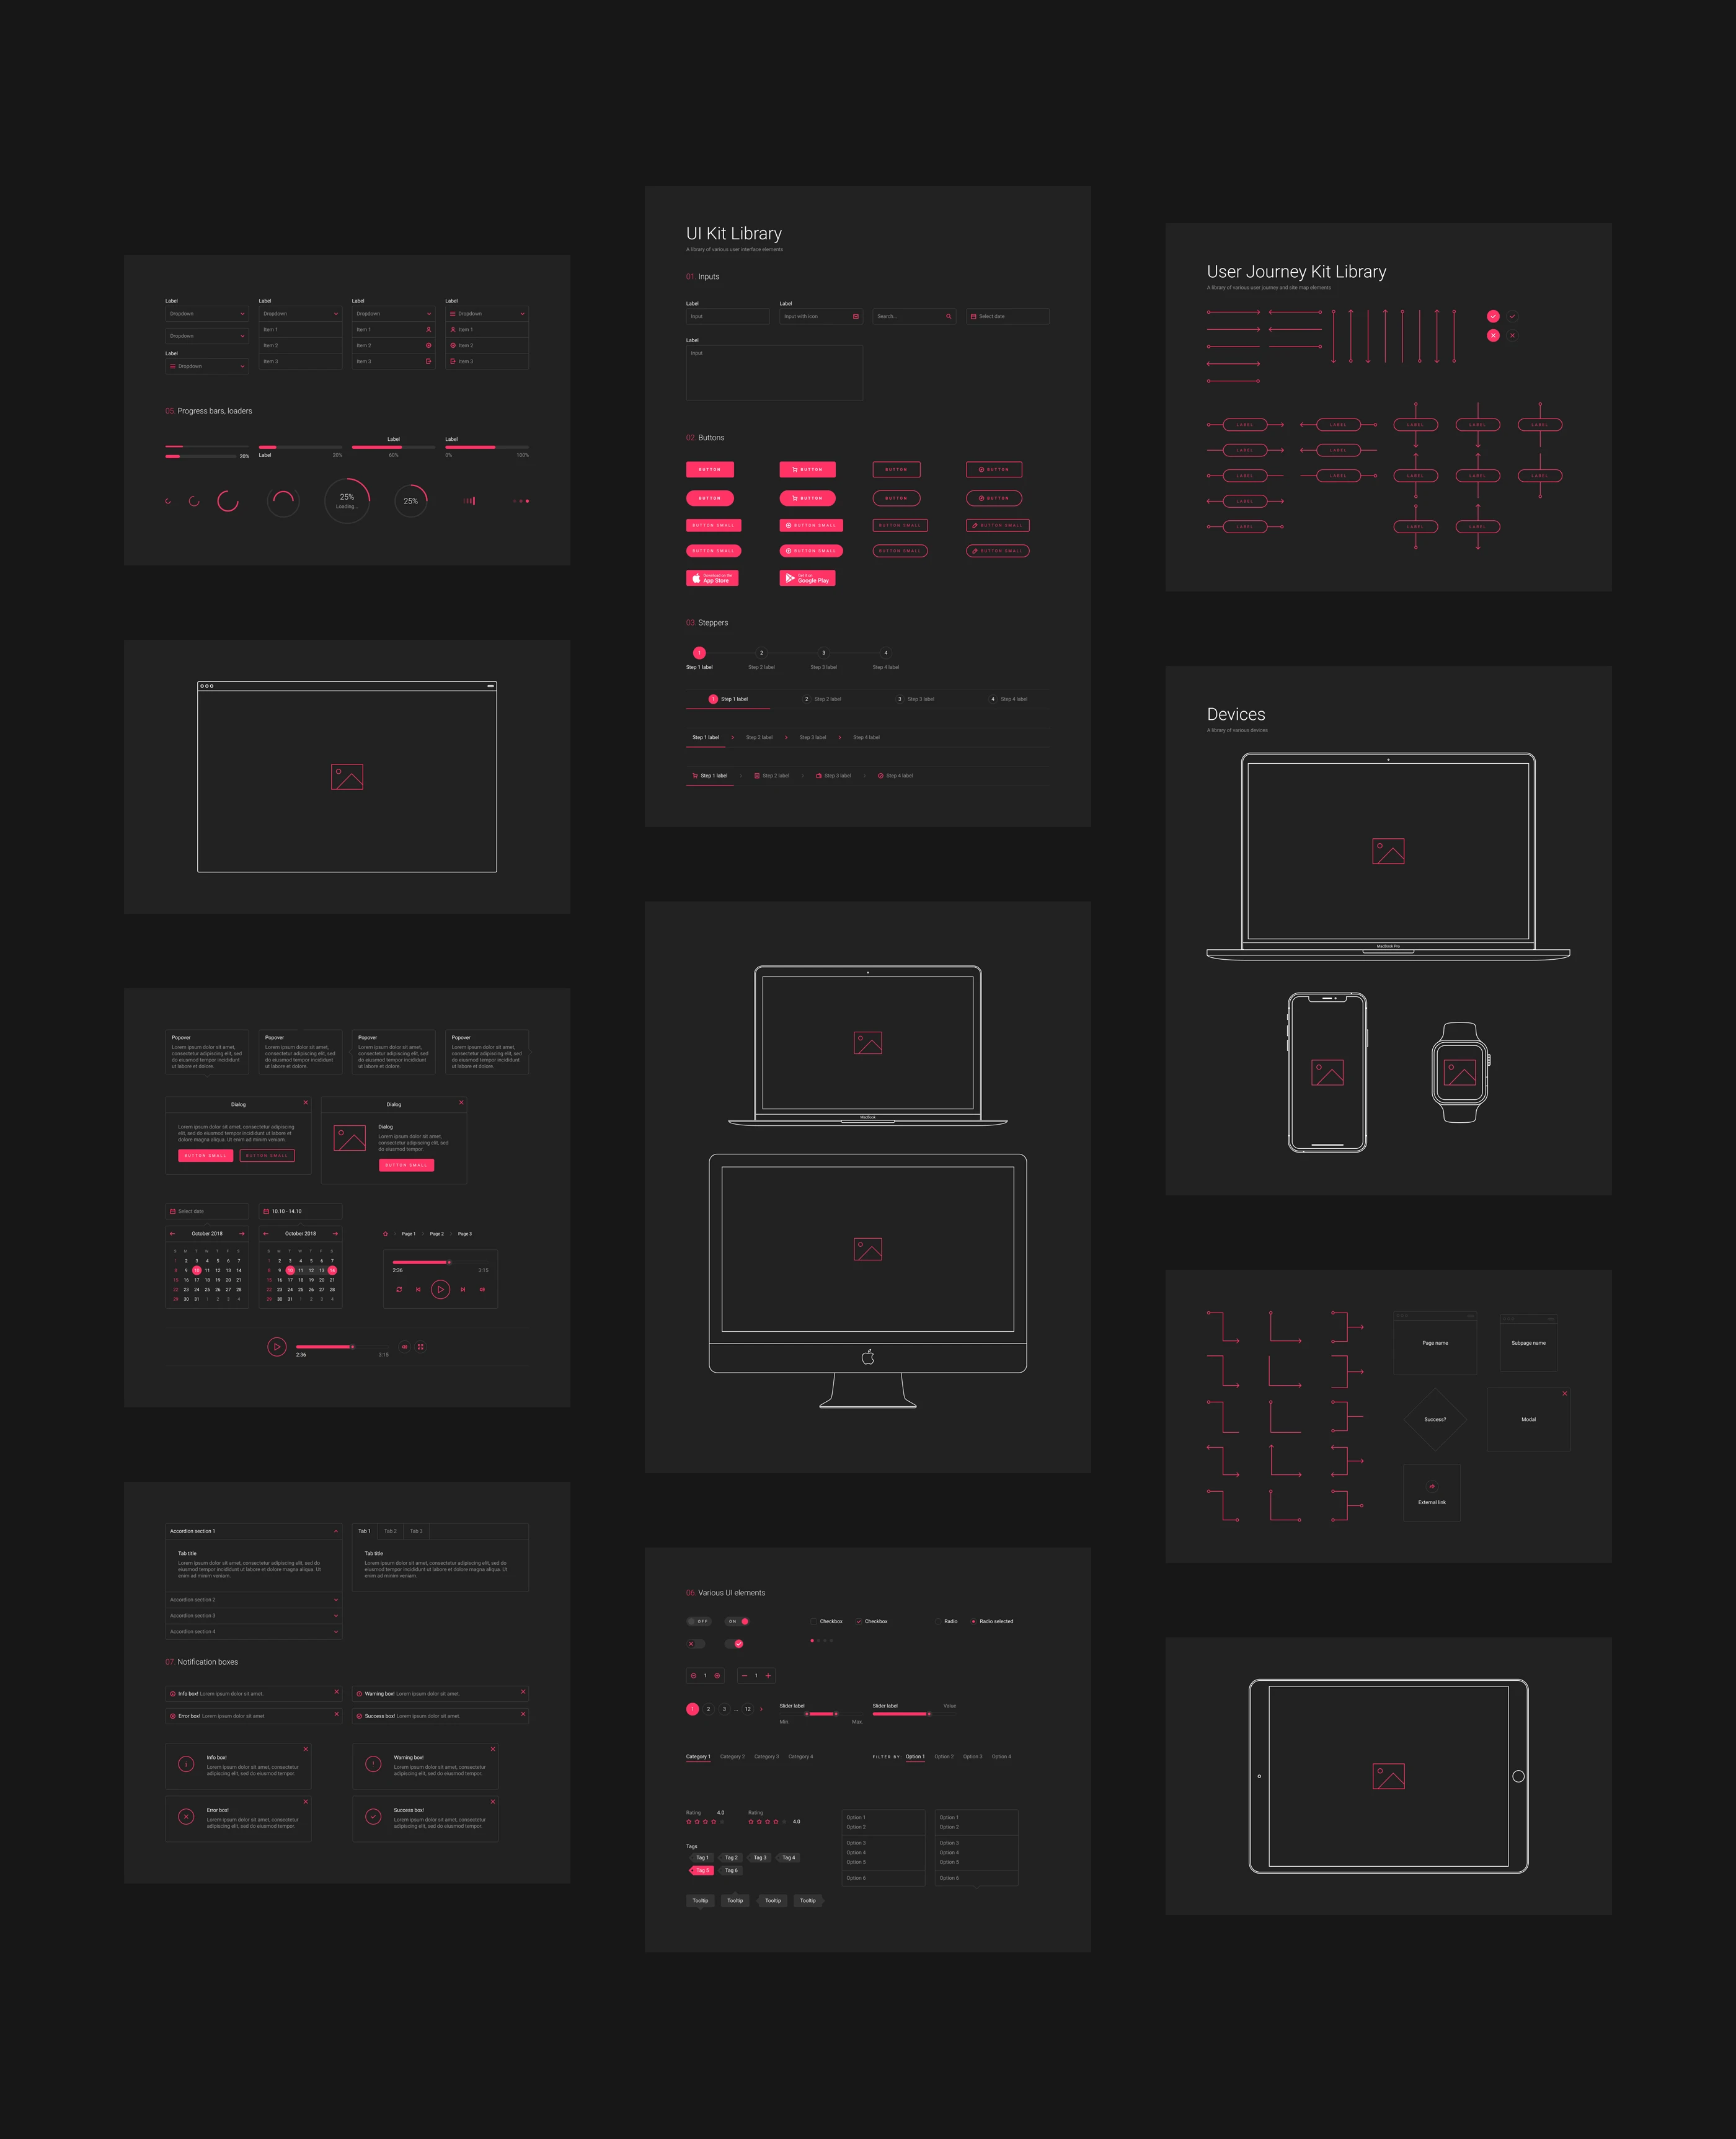 Basic UX for Invision Studio - The final deliverable was a family of 4 products that you can download and use for free. Just download InVision Studio, open their App Store and search for 128 Outline Icons, eCommerce Wireframe Kit, User Interface Kit and Web Wireframe Kit.